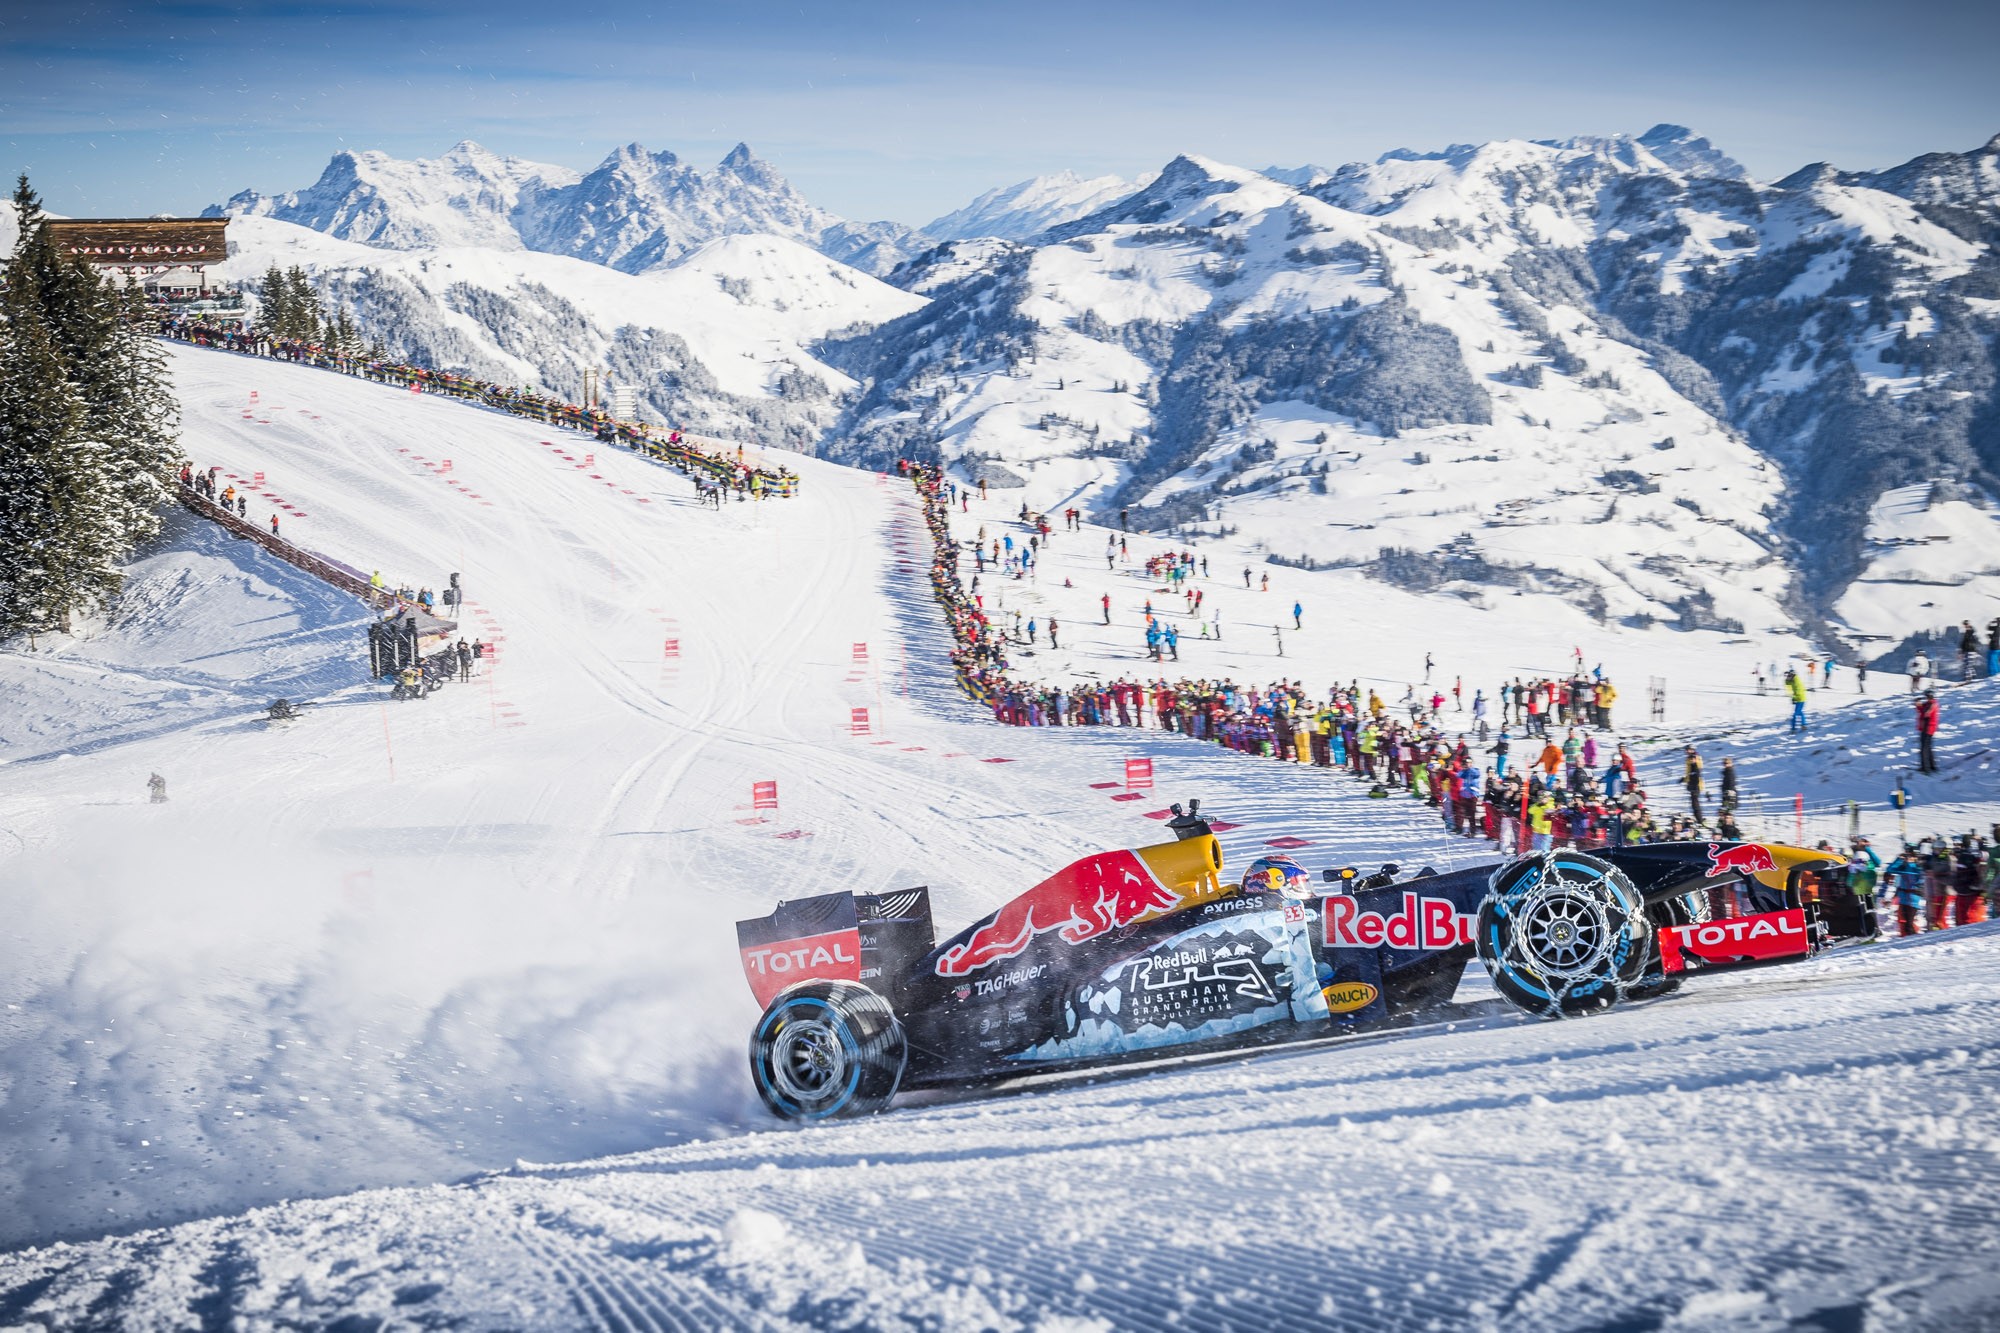 General 2000x1333 winter mountains Red Bull race cars landscape vehicle car snow snowy peak